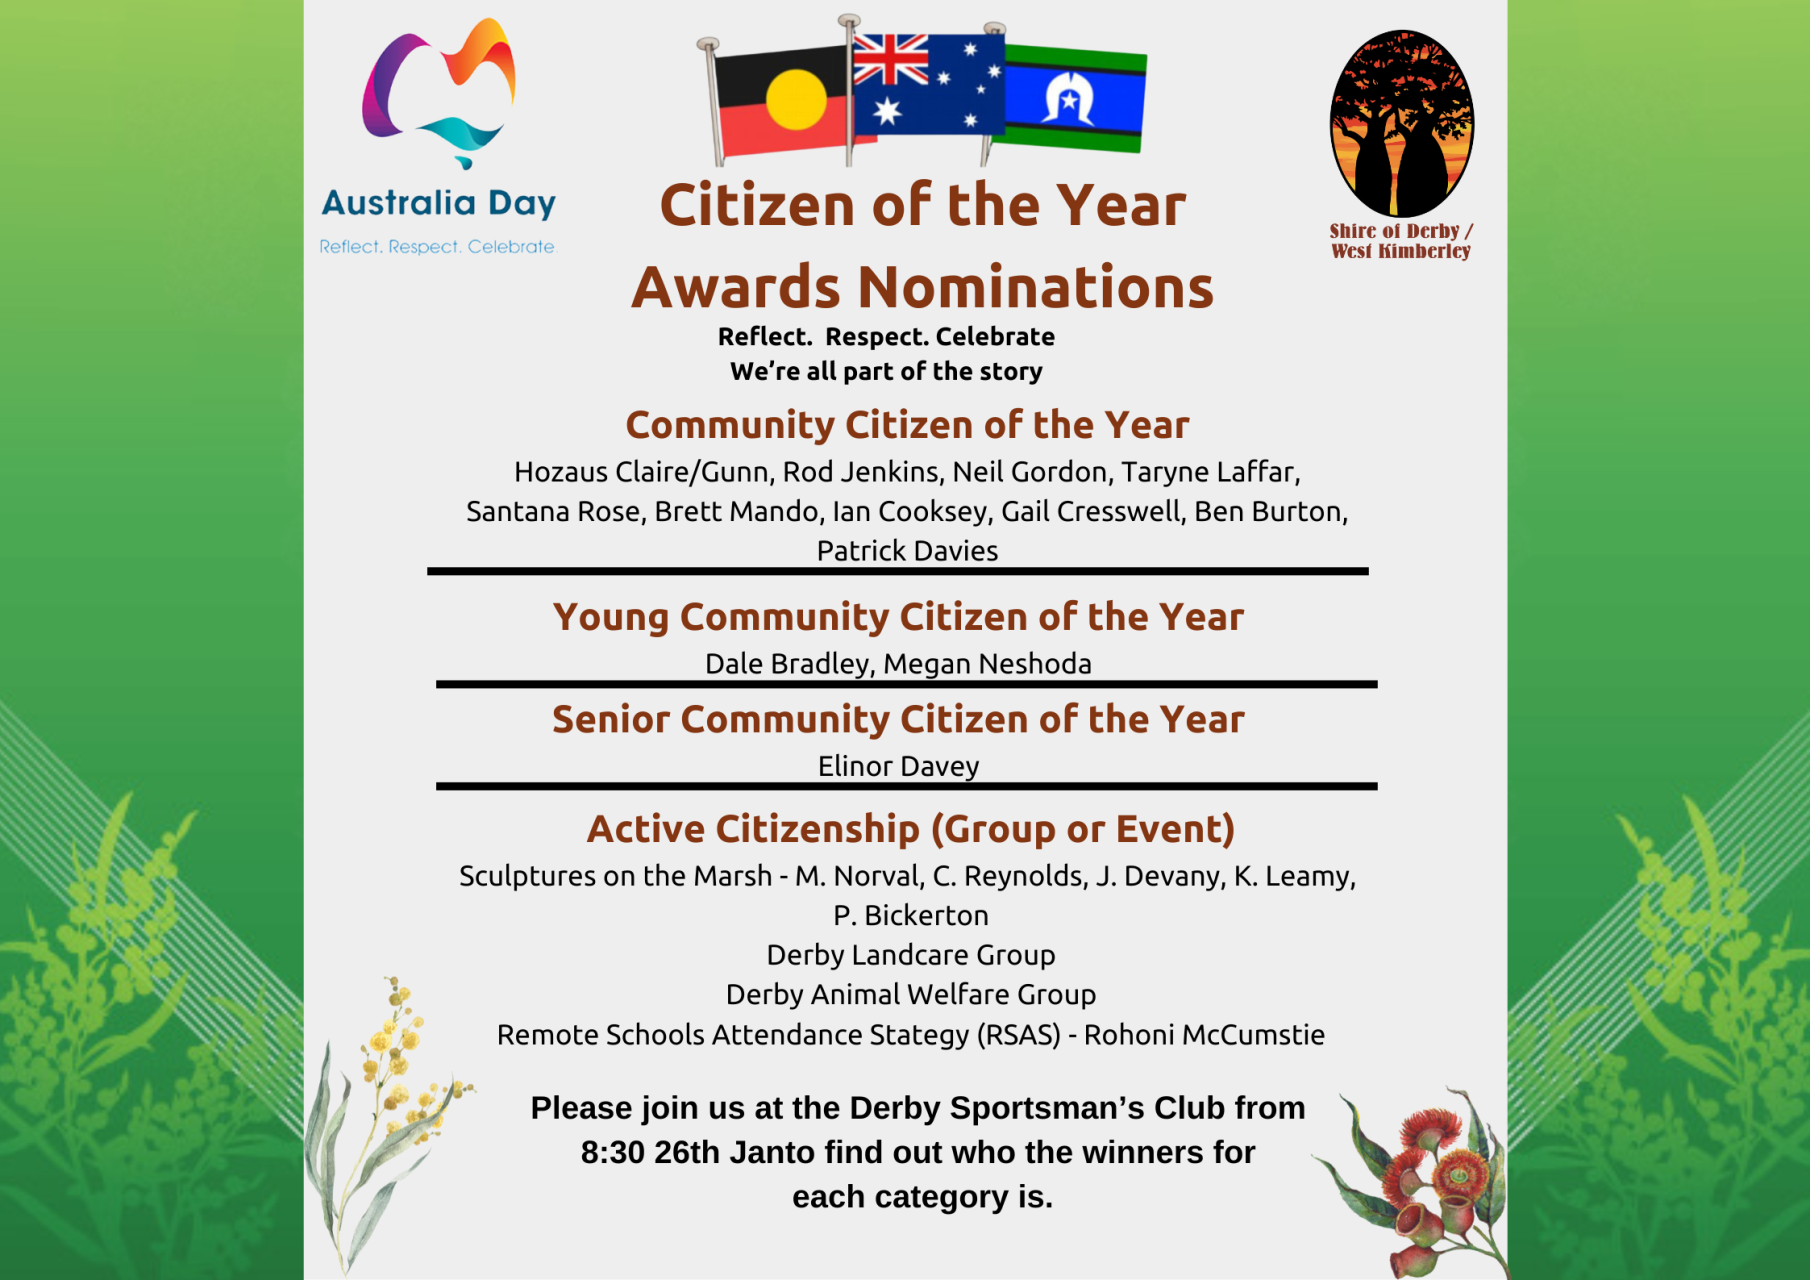 Citizen of the Year Awards - Nominees